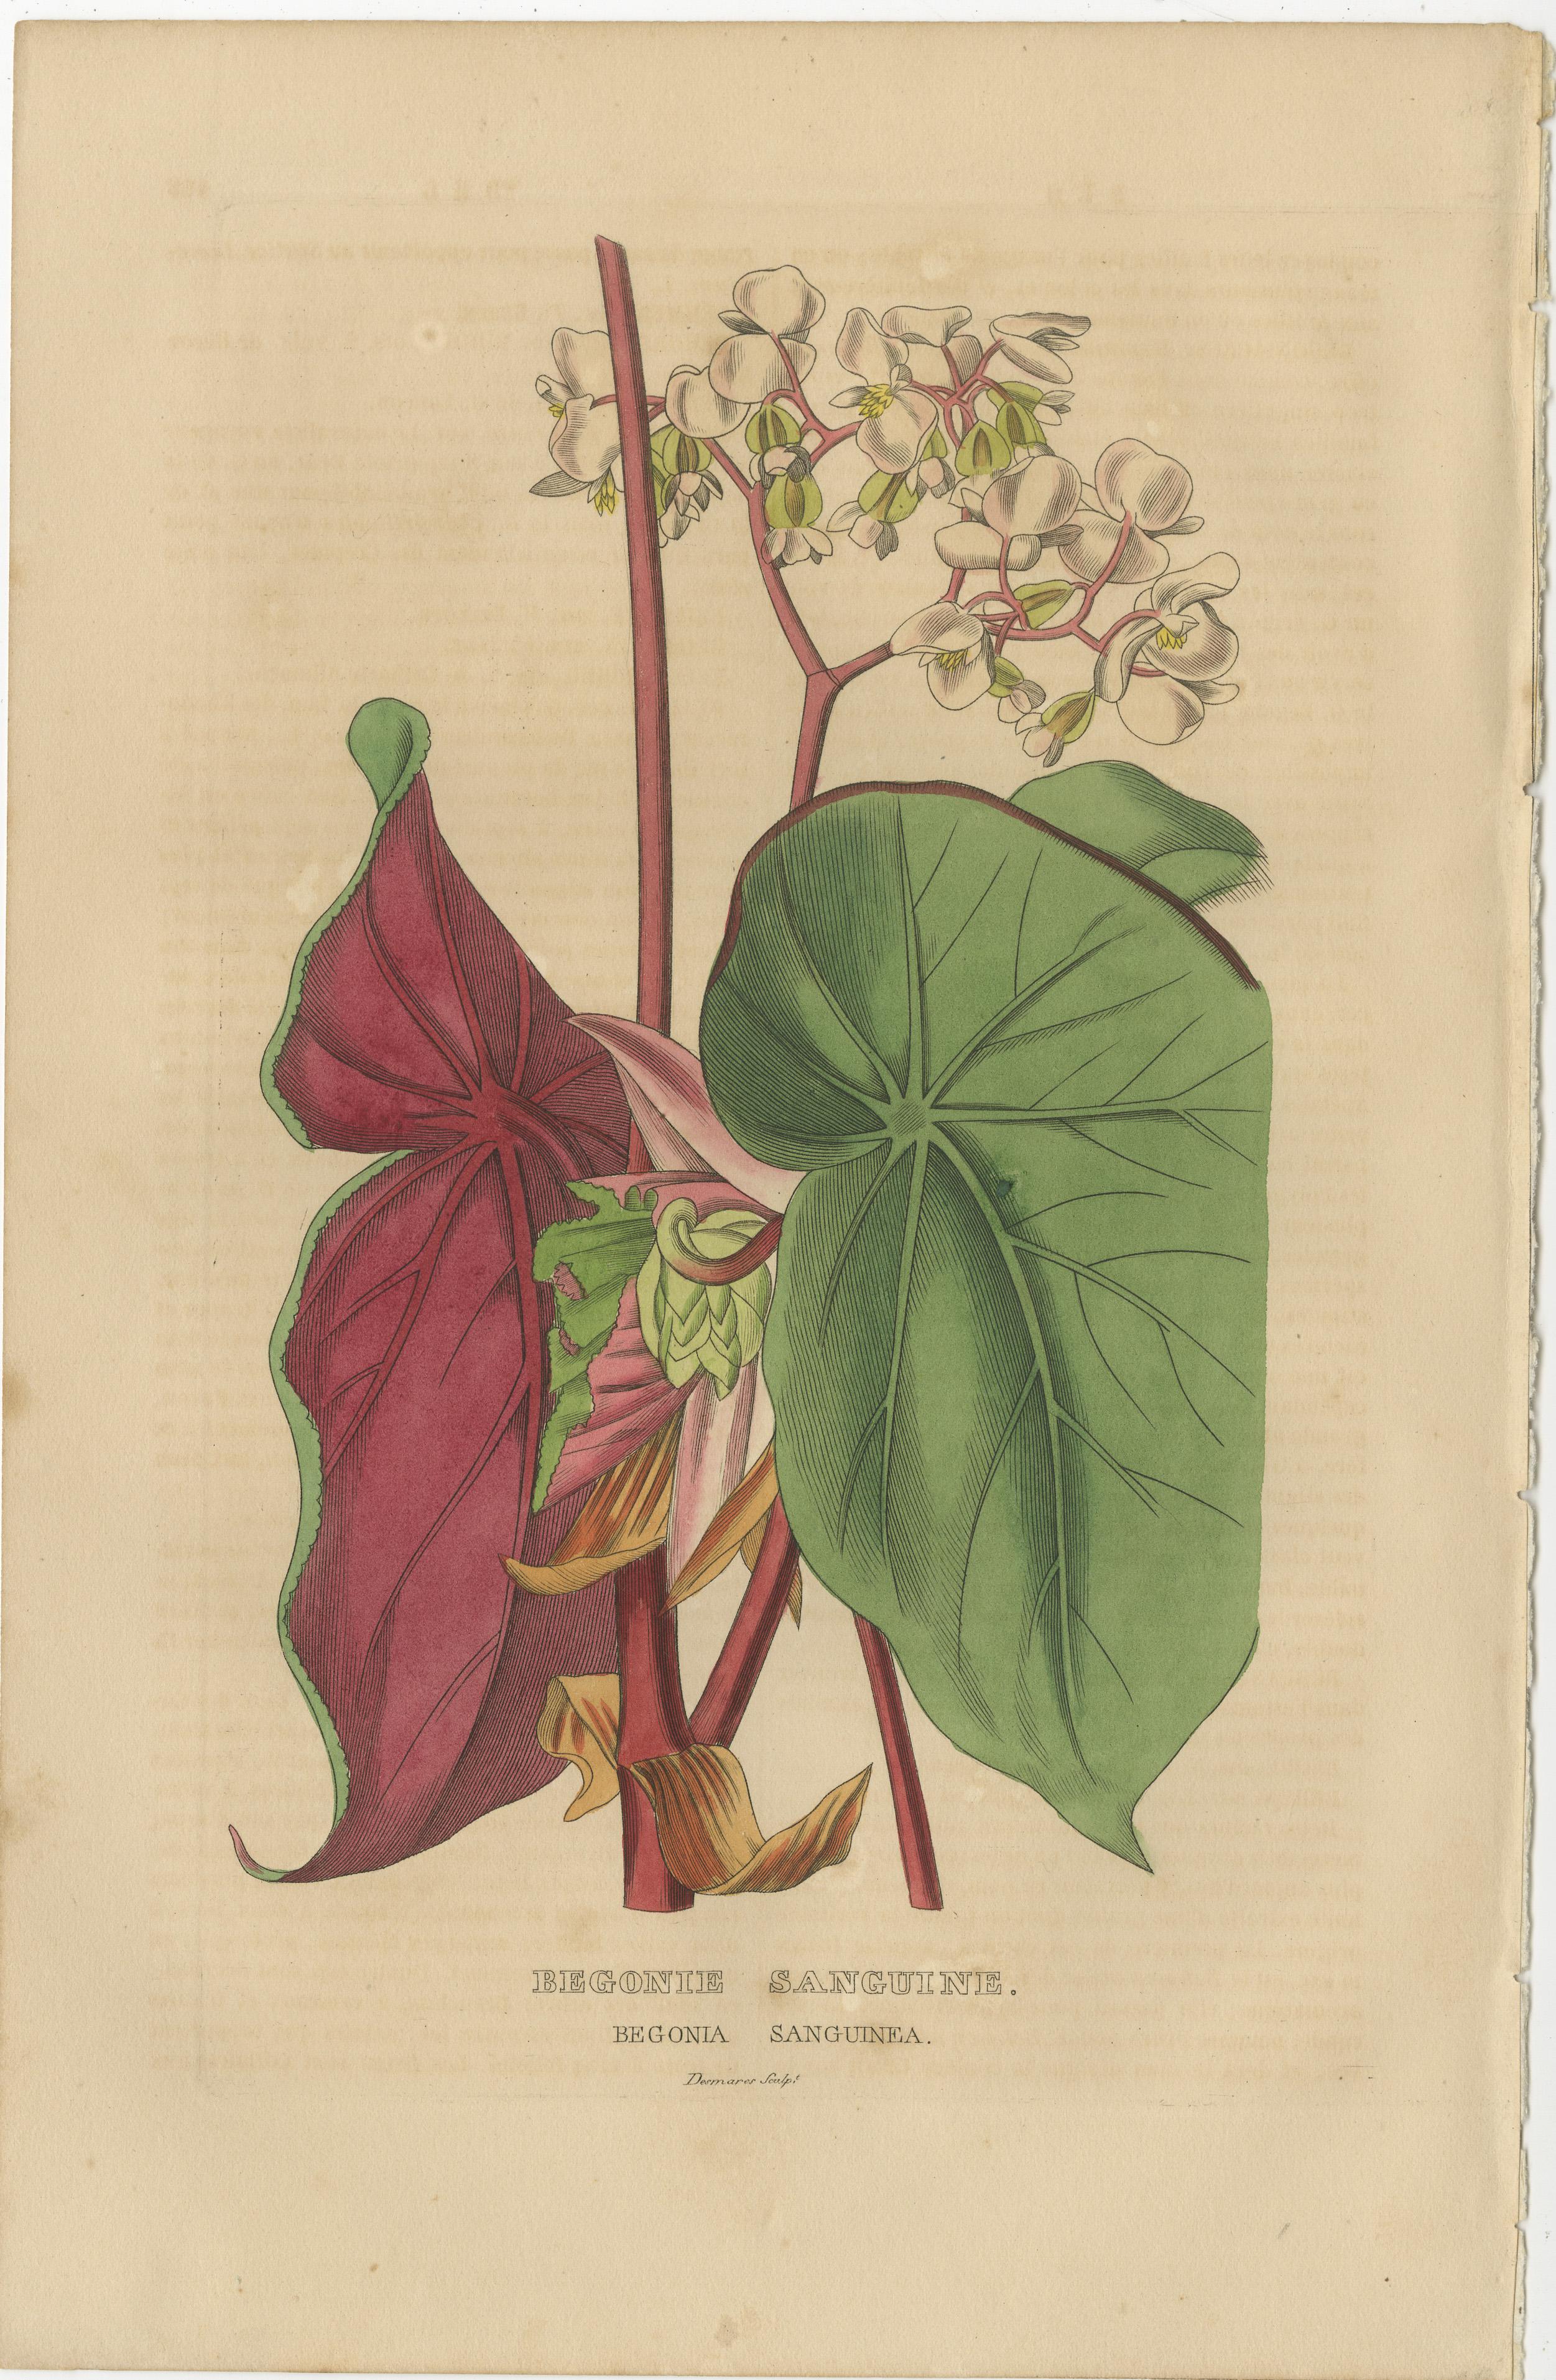 Engraved Botanical Rarities: Pristine Hand-Colored Engravings from 1845 For Sale